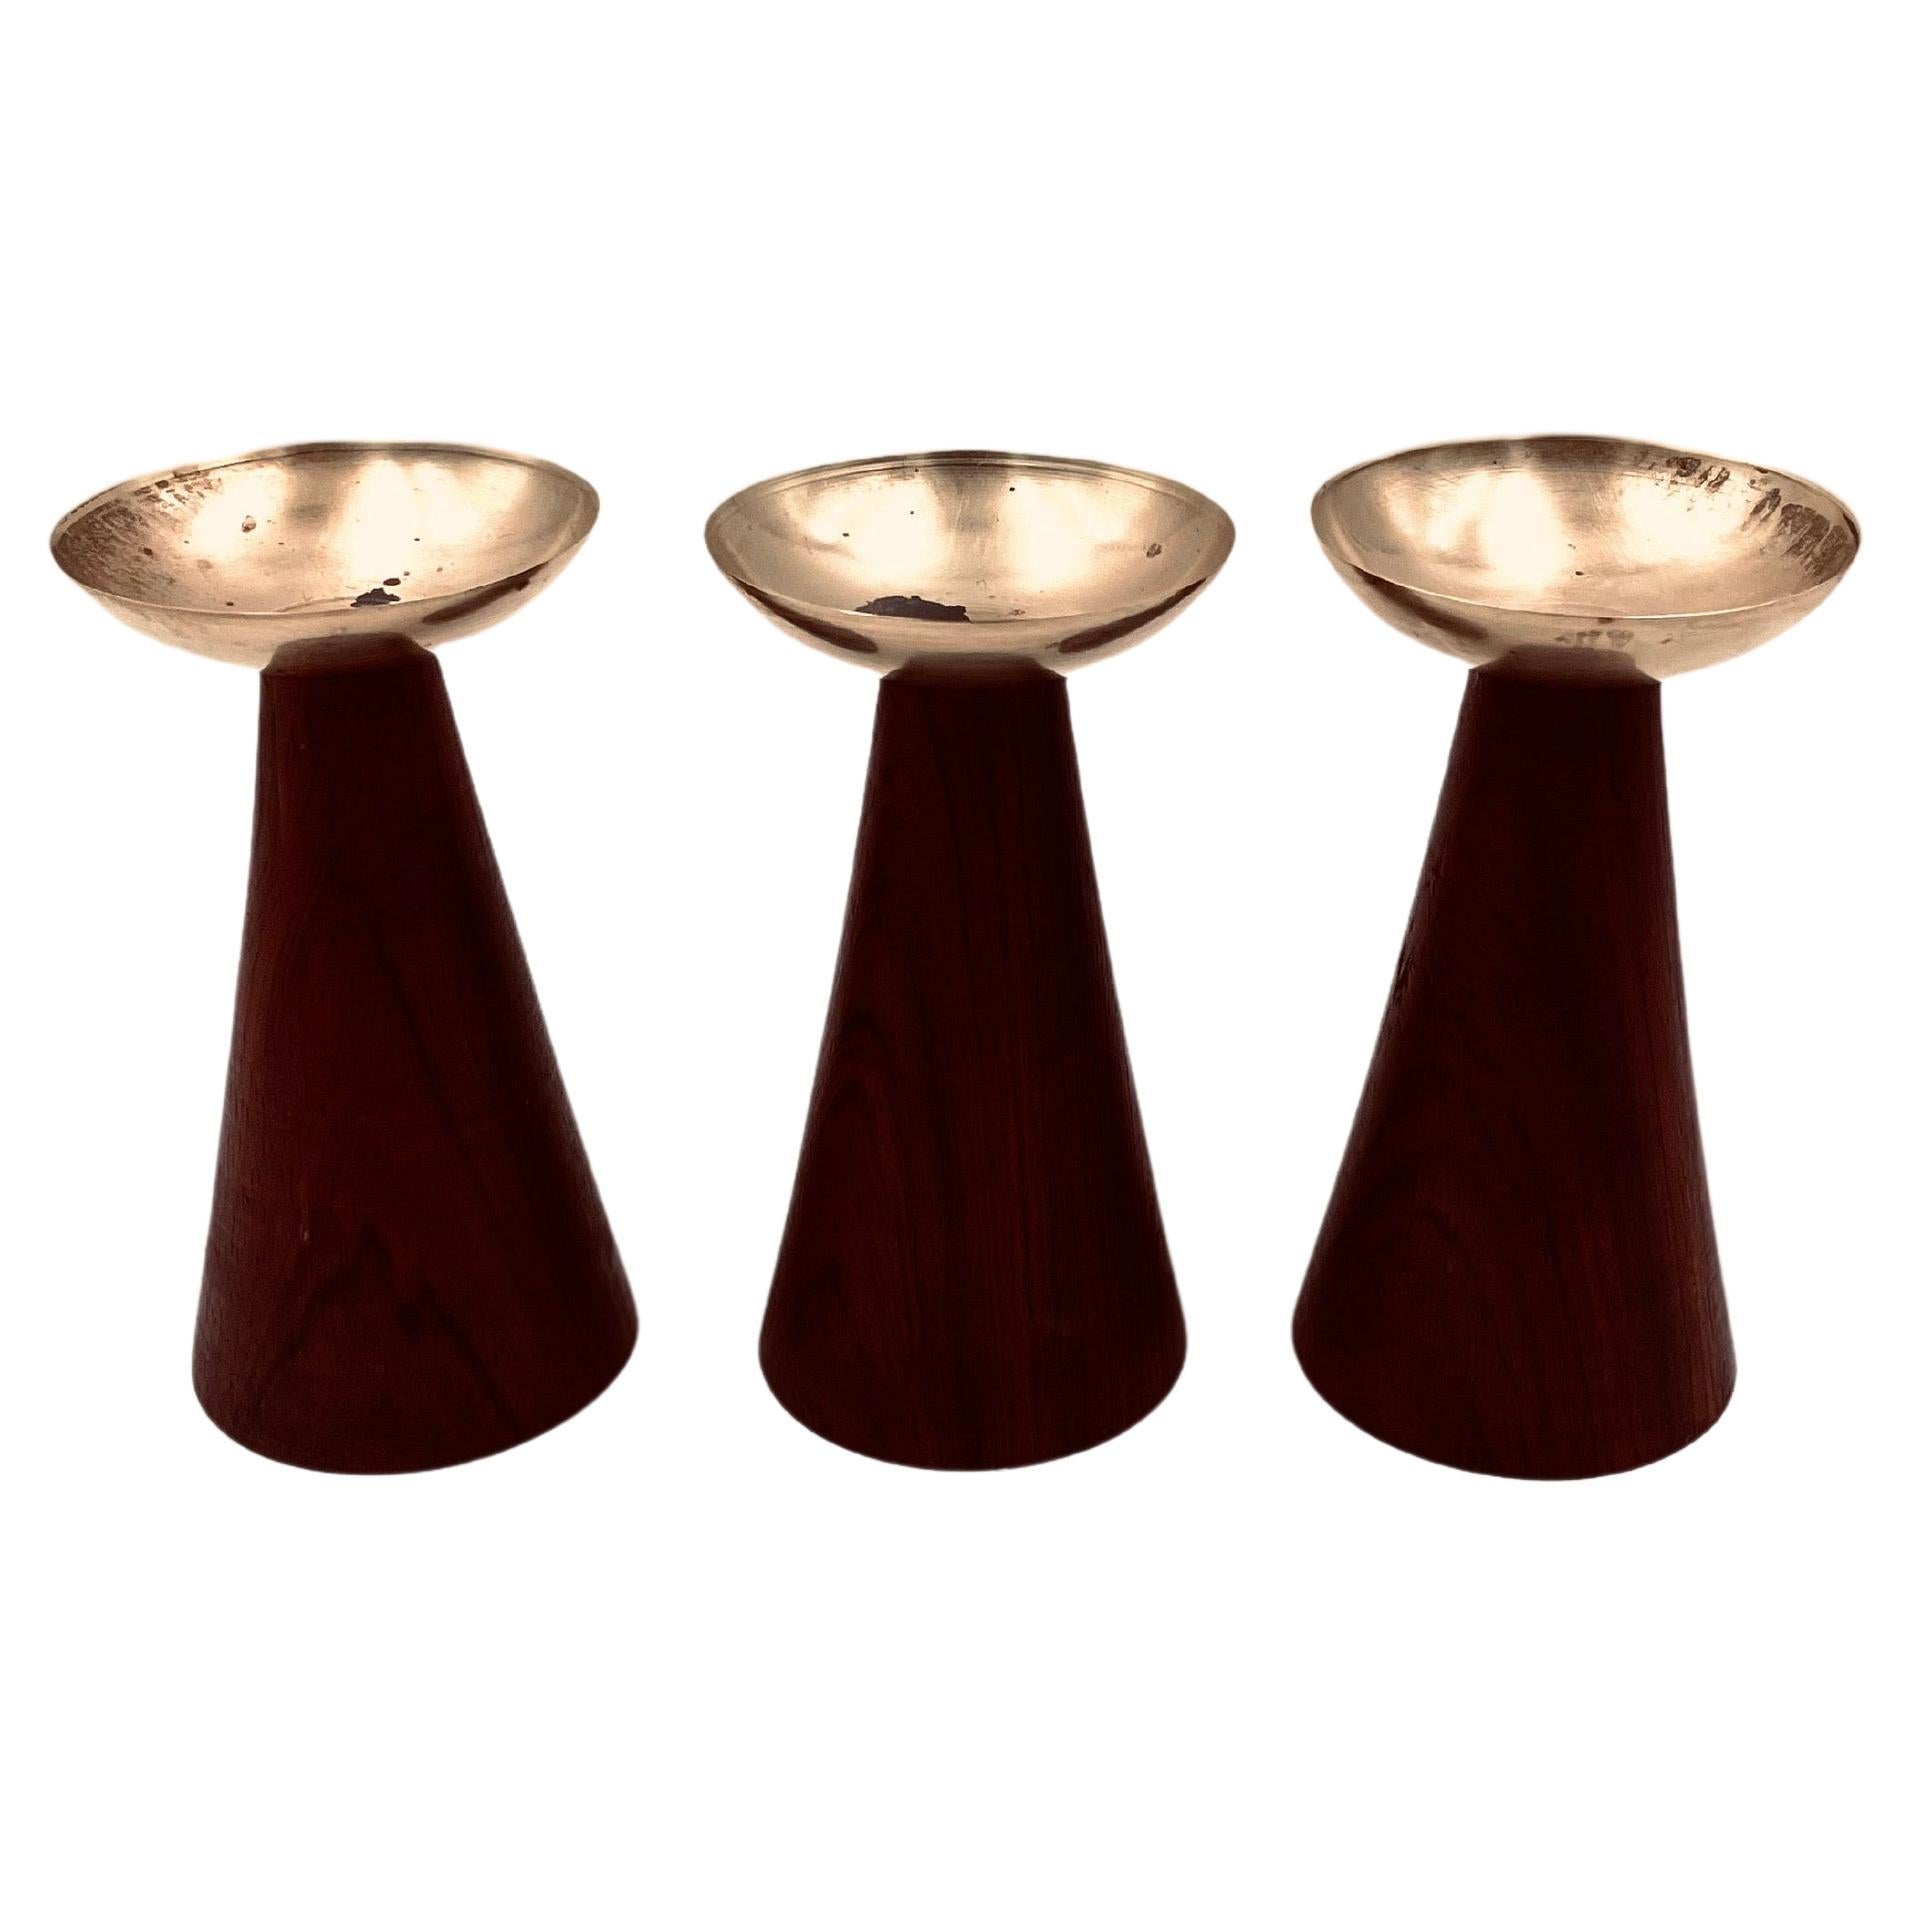 Danish Modern Rare Set of 3 Candle Hoders by Hans Agne Jakobsson Ahus For Sale